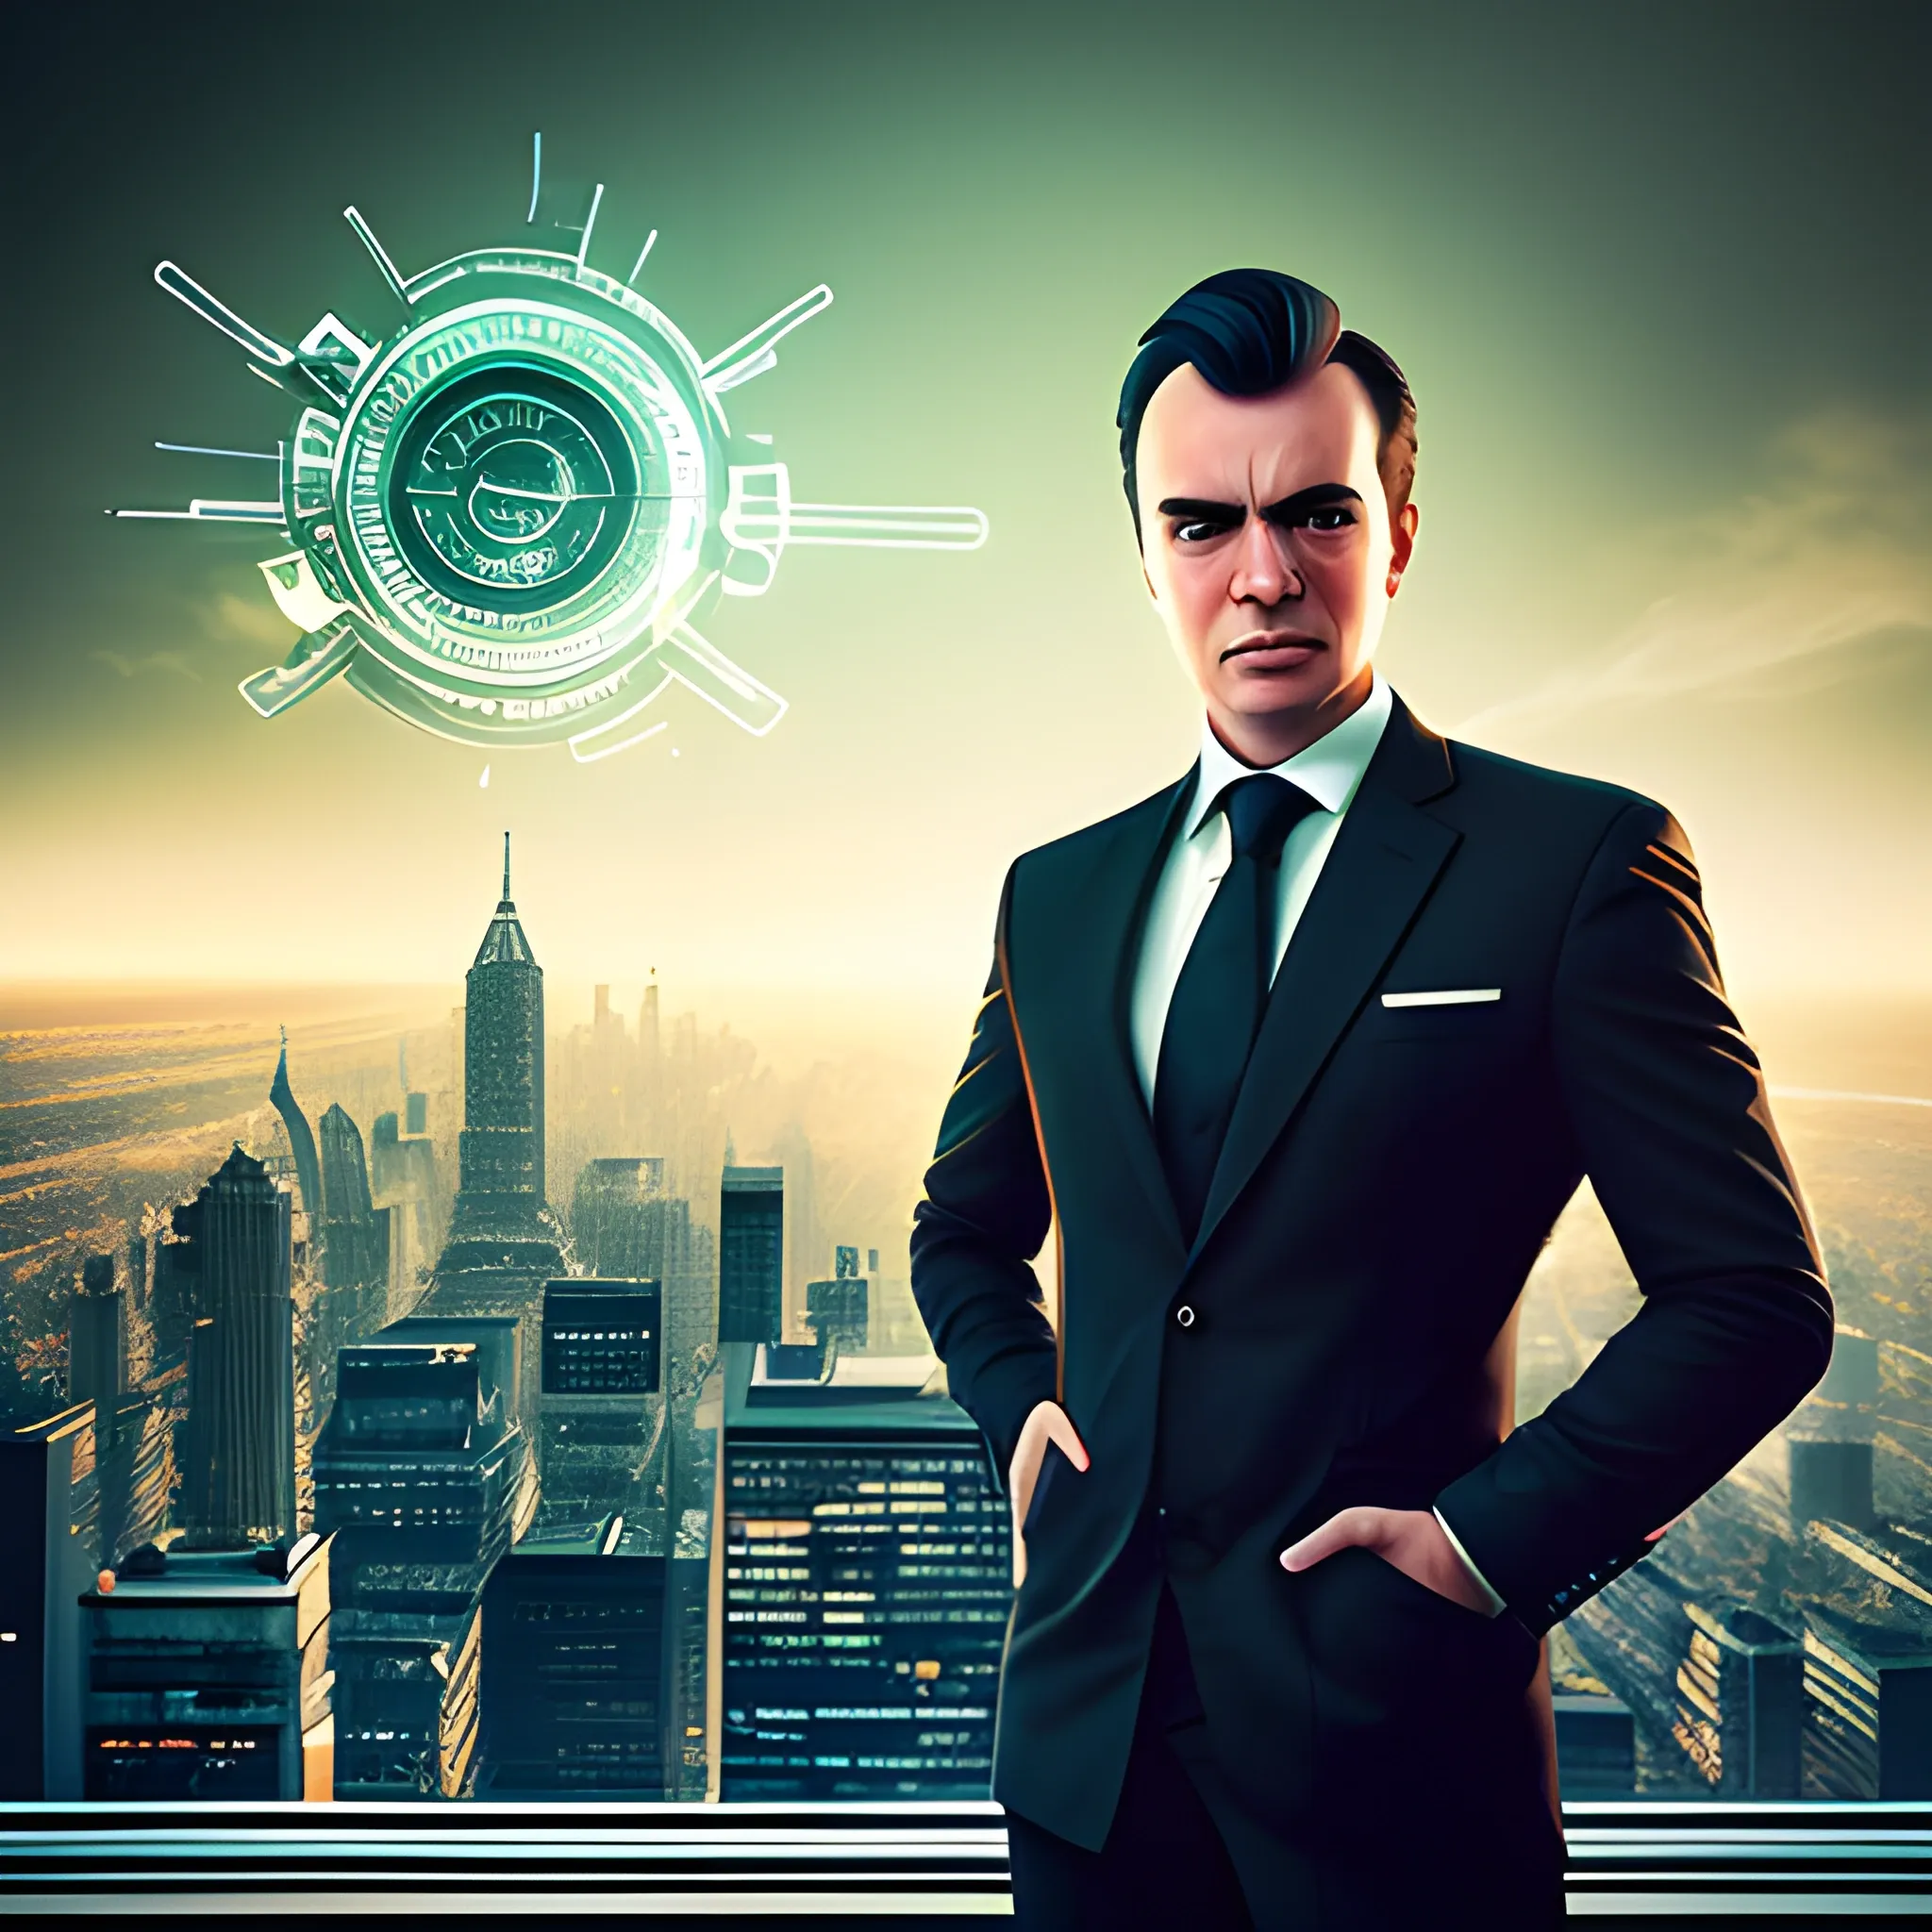 Create a stylized portrait of an entrepreneur against a city skyline. Use dramatic lighting and post-processing techniques to create a futuristic look.